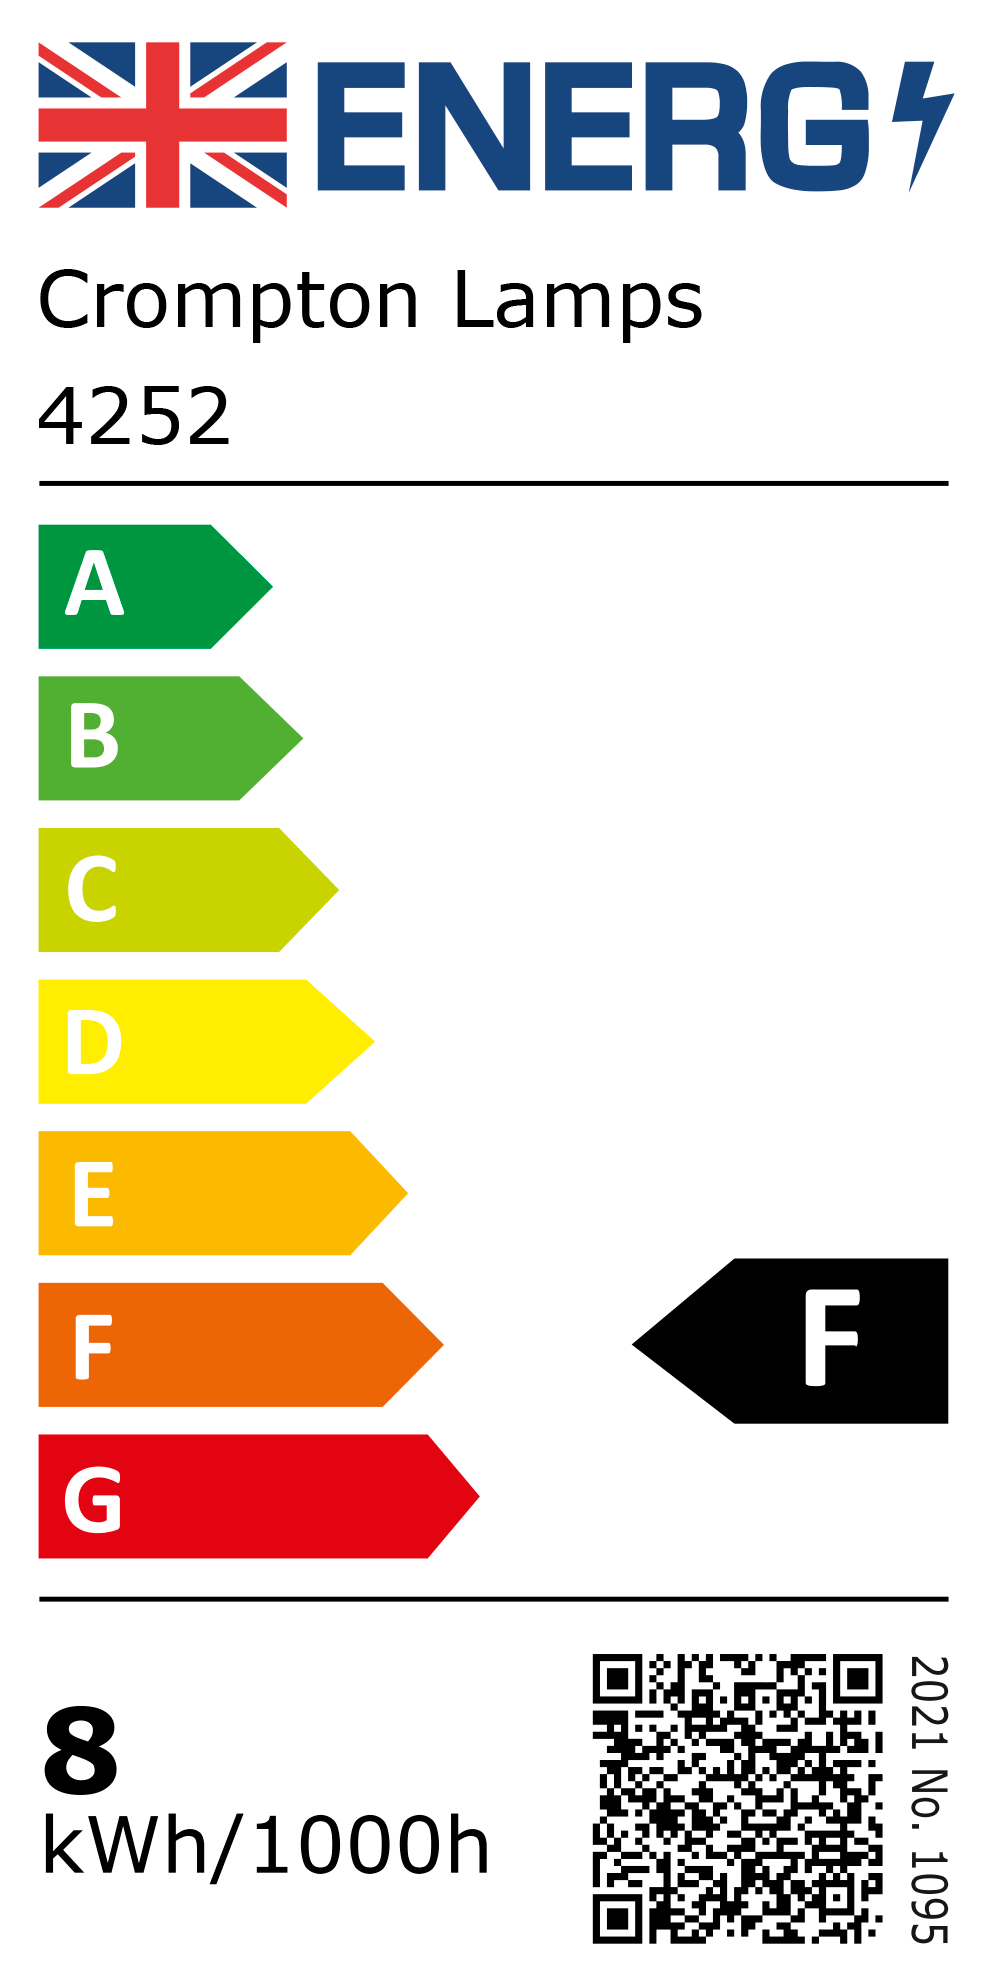 New 2021 Energy Rating Label: MPN 4252